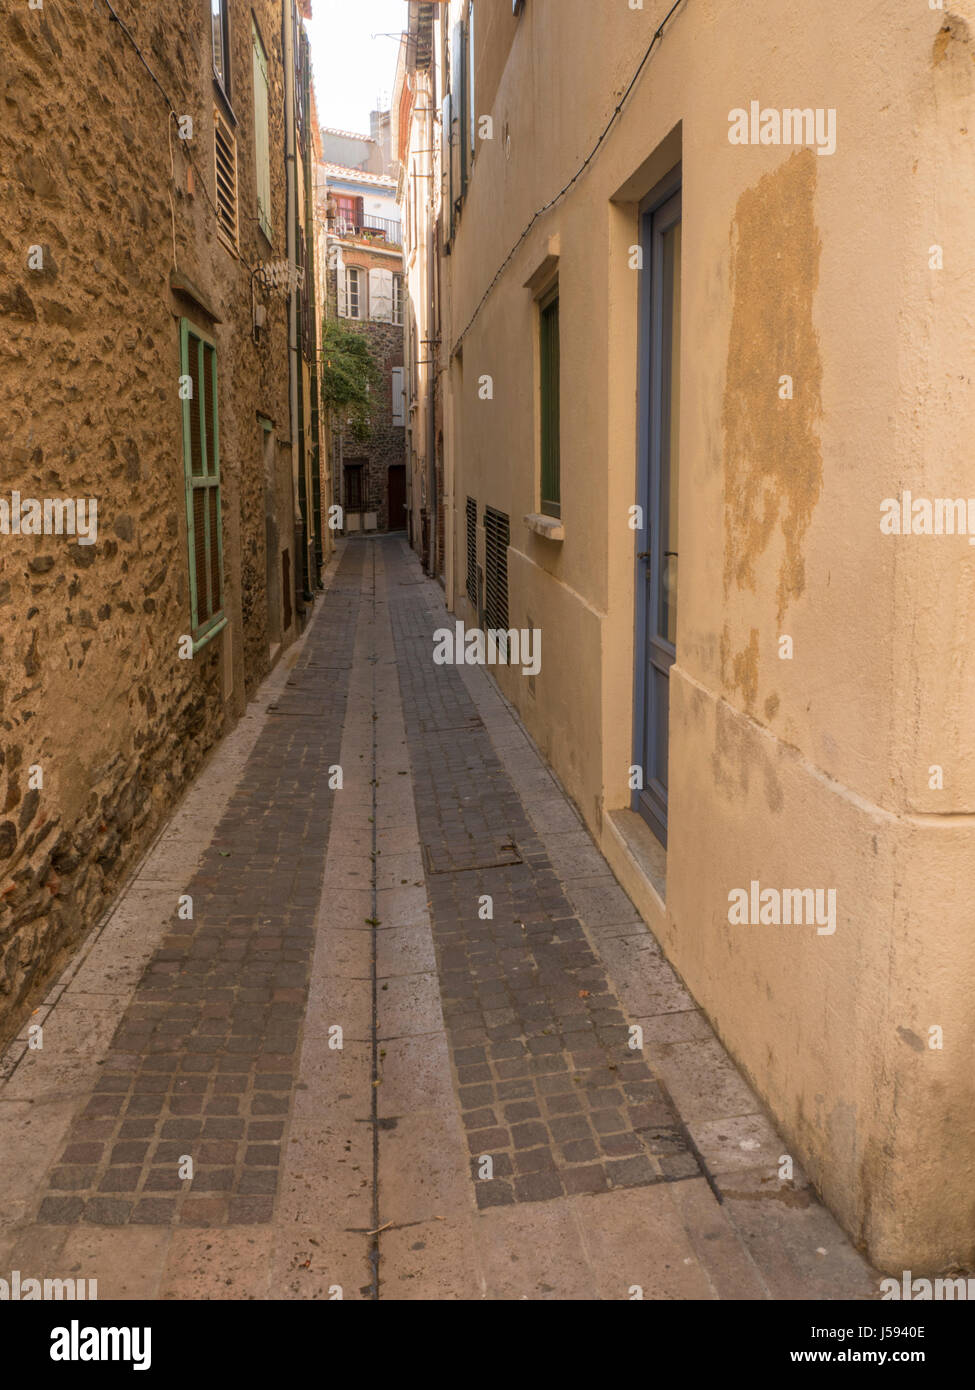 Narrow passage giving access to dwellings Stock Photo